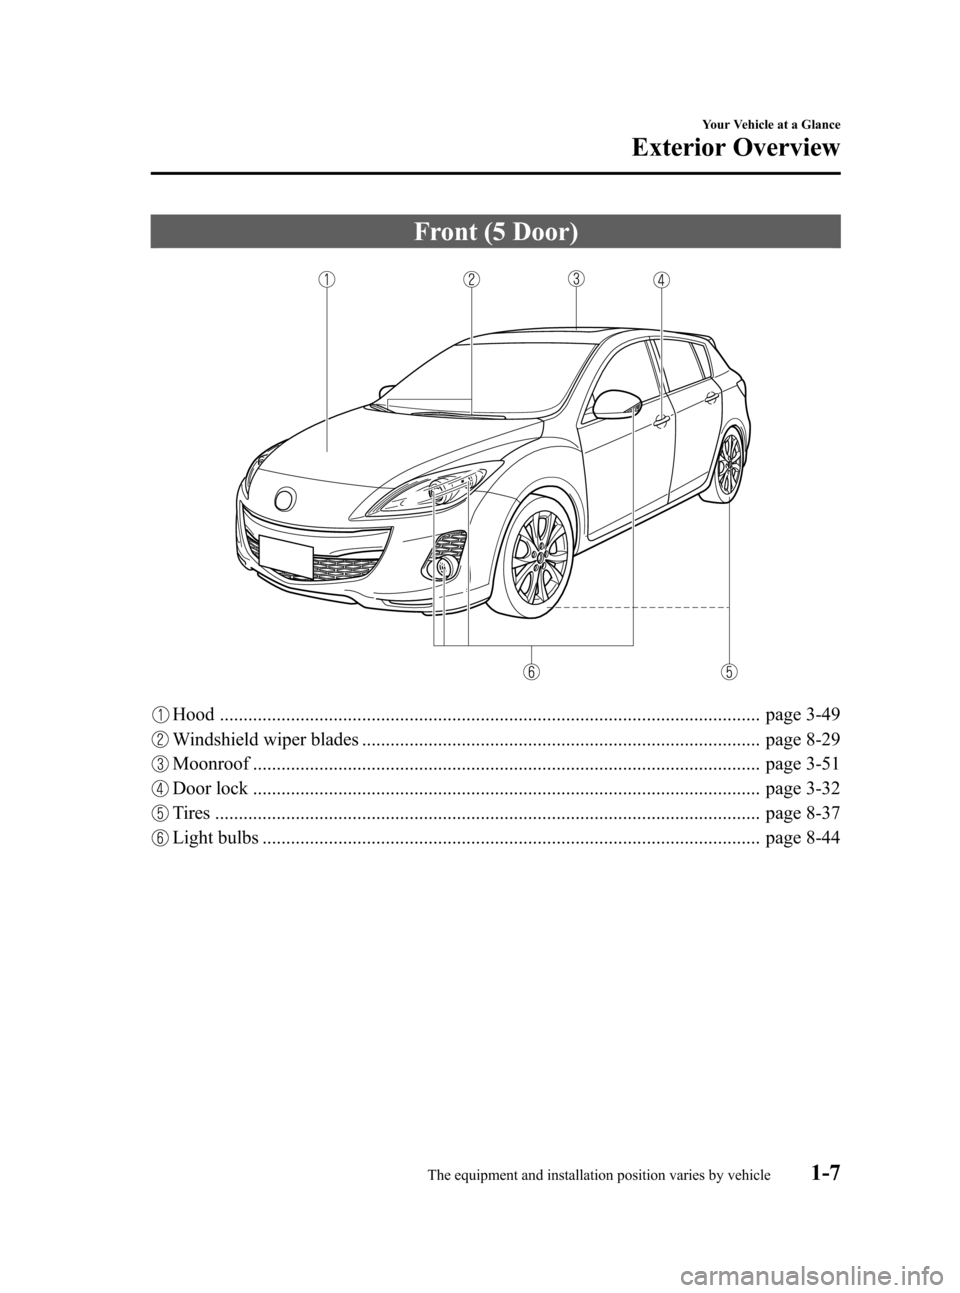 MAZDA MODEL 3 HATCHBACK 2012  Owners Manual (in English) Black plate (13,1)
Front (5 Door)
Hood .................................................................................................................. page 3-49
Windshield wiper blades ............